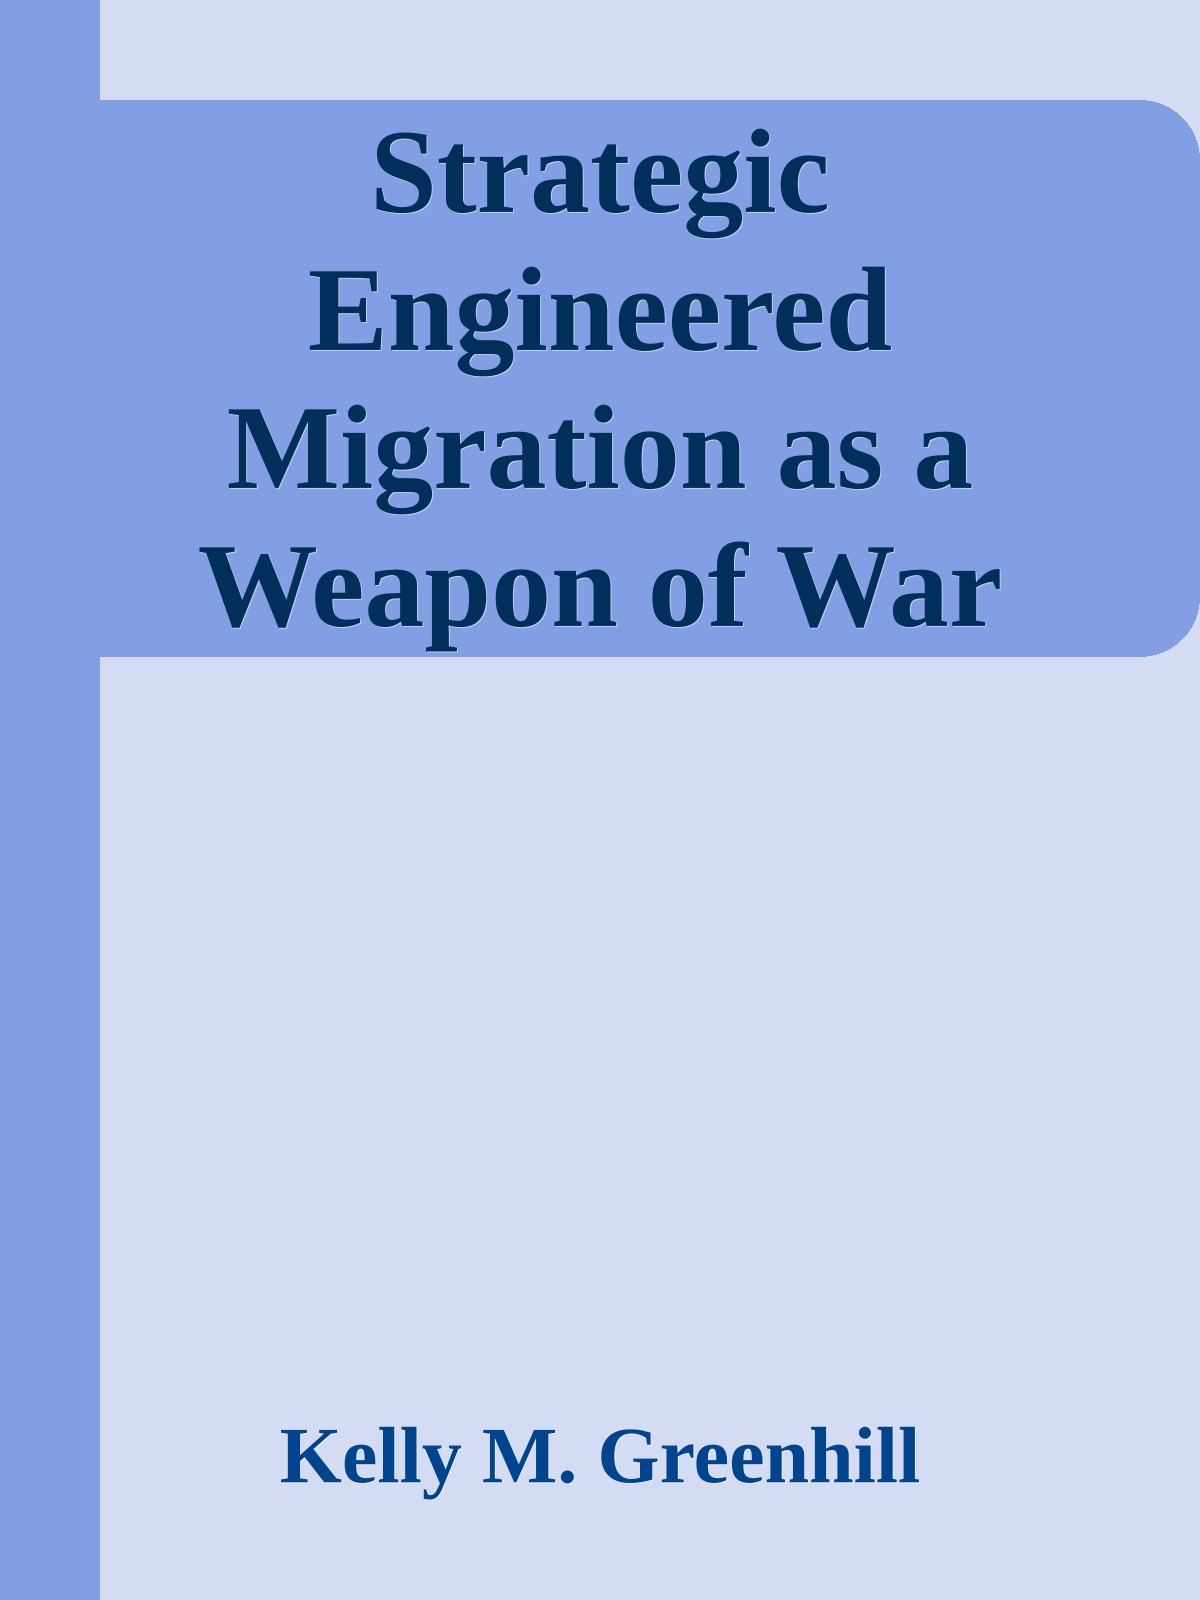 Strategic Engineered Migration as a Weapon of War (2008) by Kelly M. Greenhill